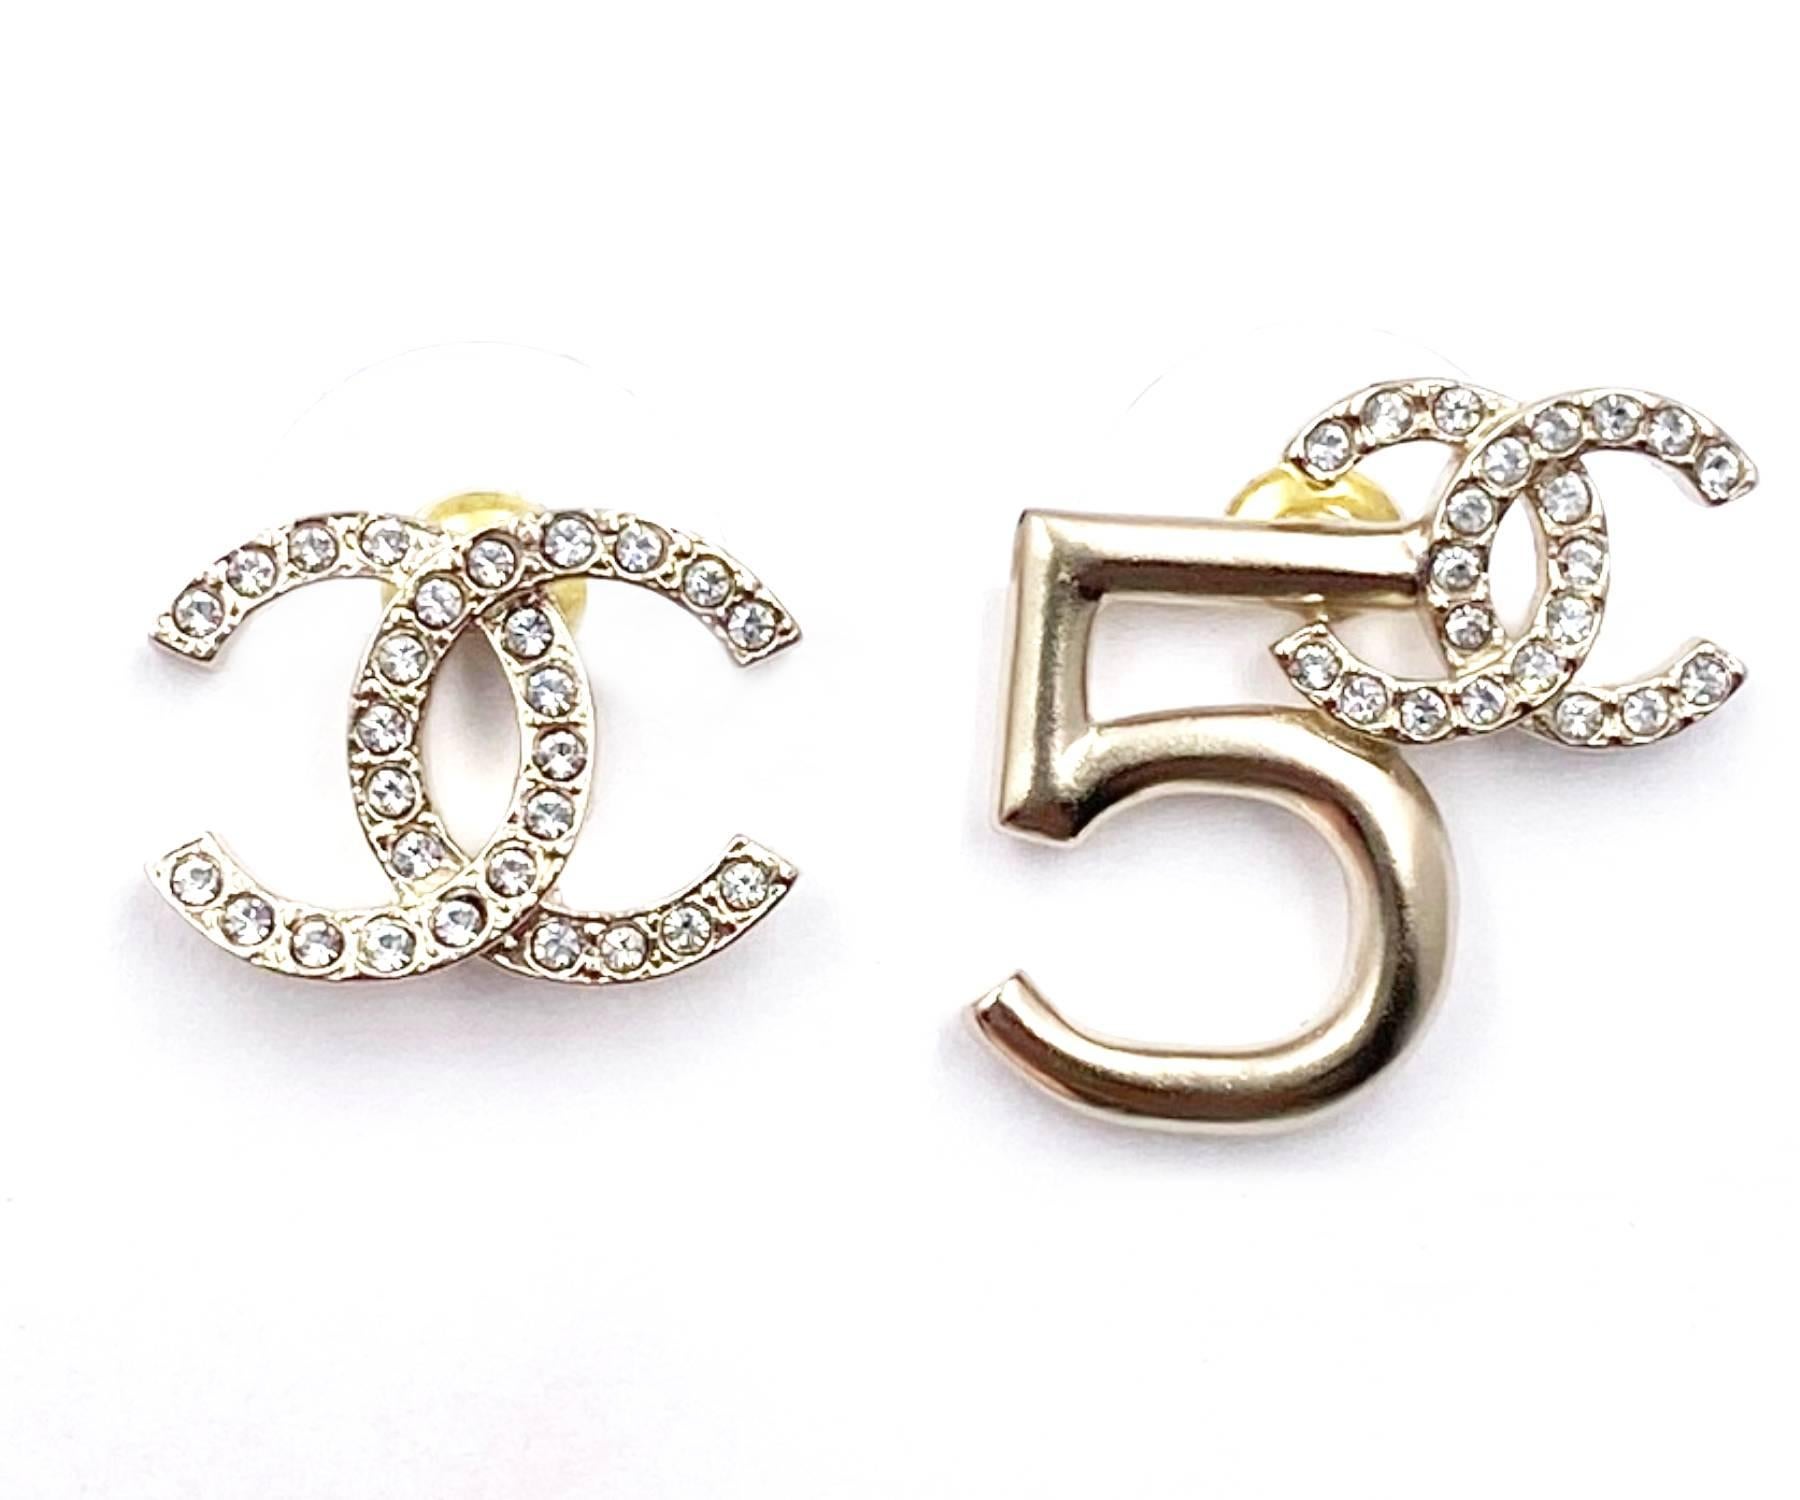 Chanel Brand New Gold CC Crystal 5 Asymmetrical Piercing Earrings

*Marked 21
*Made in France
*Comes with original box, pouch, ribbon and camellia
*Brand new

-Approximately 0.75″ x 0.75″
-Very unique and classic

3241-44237

